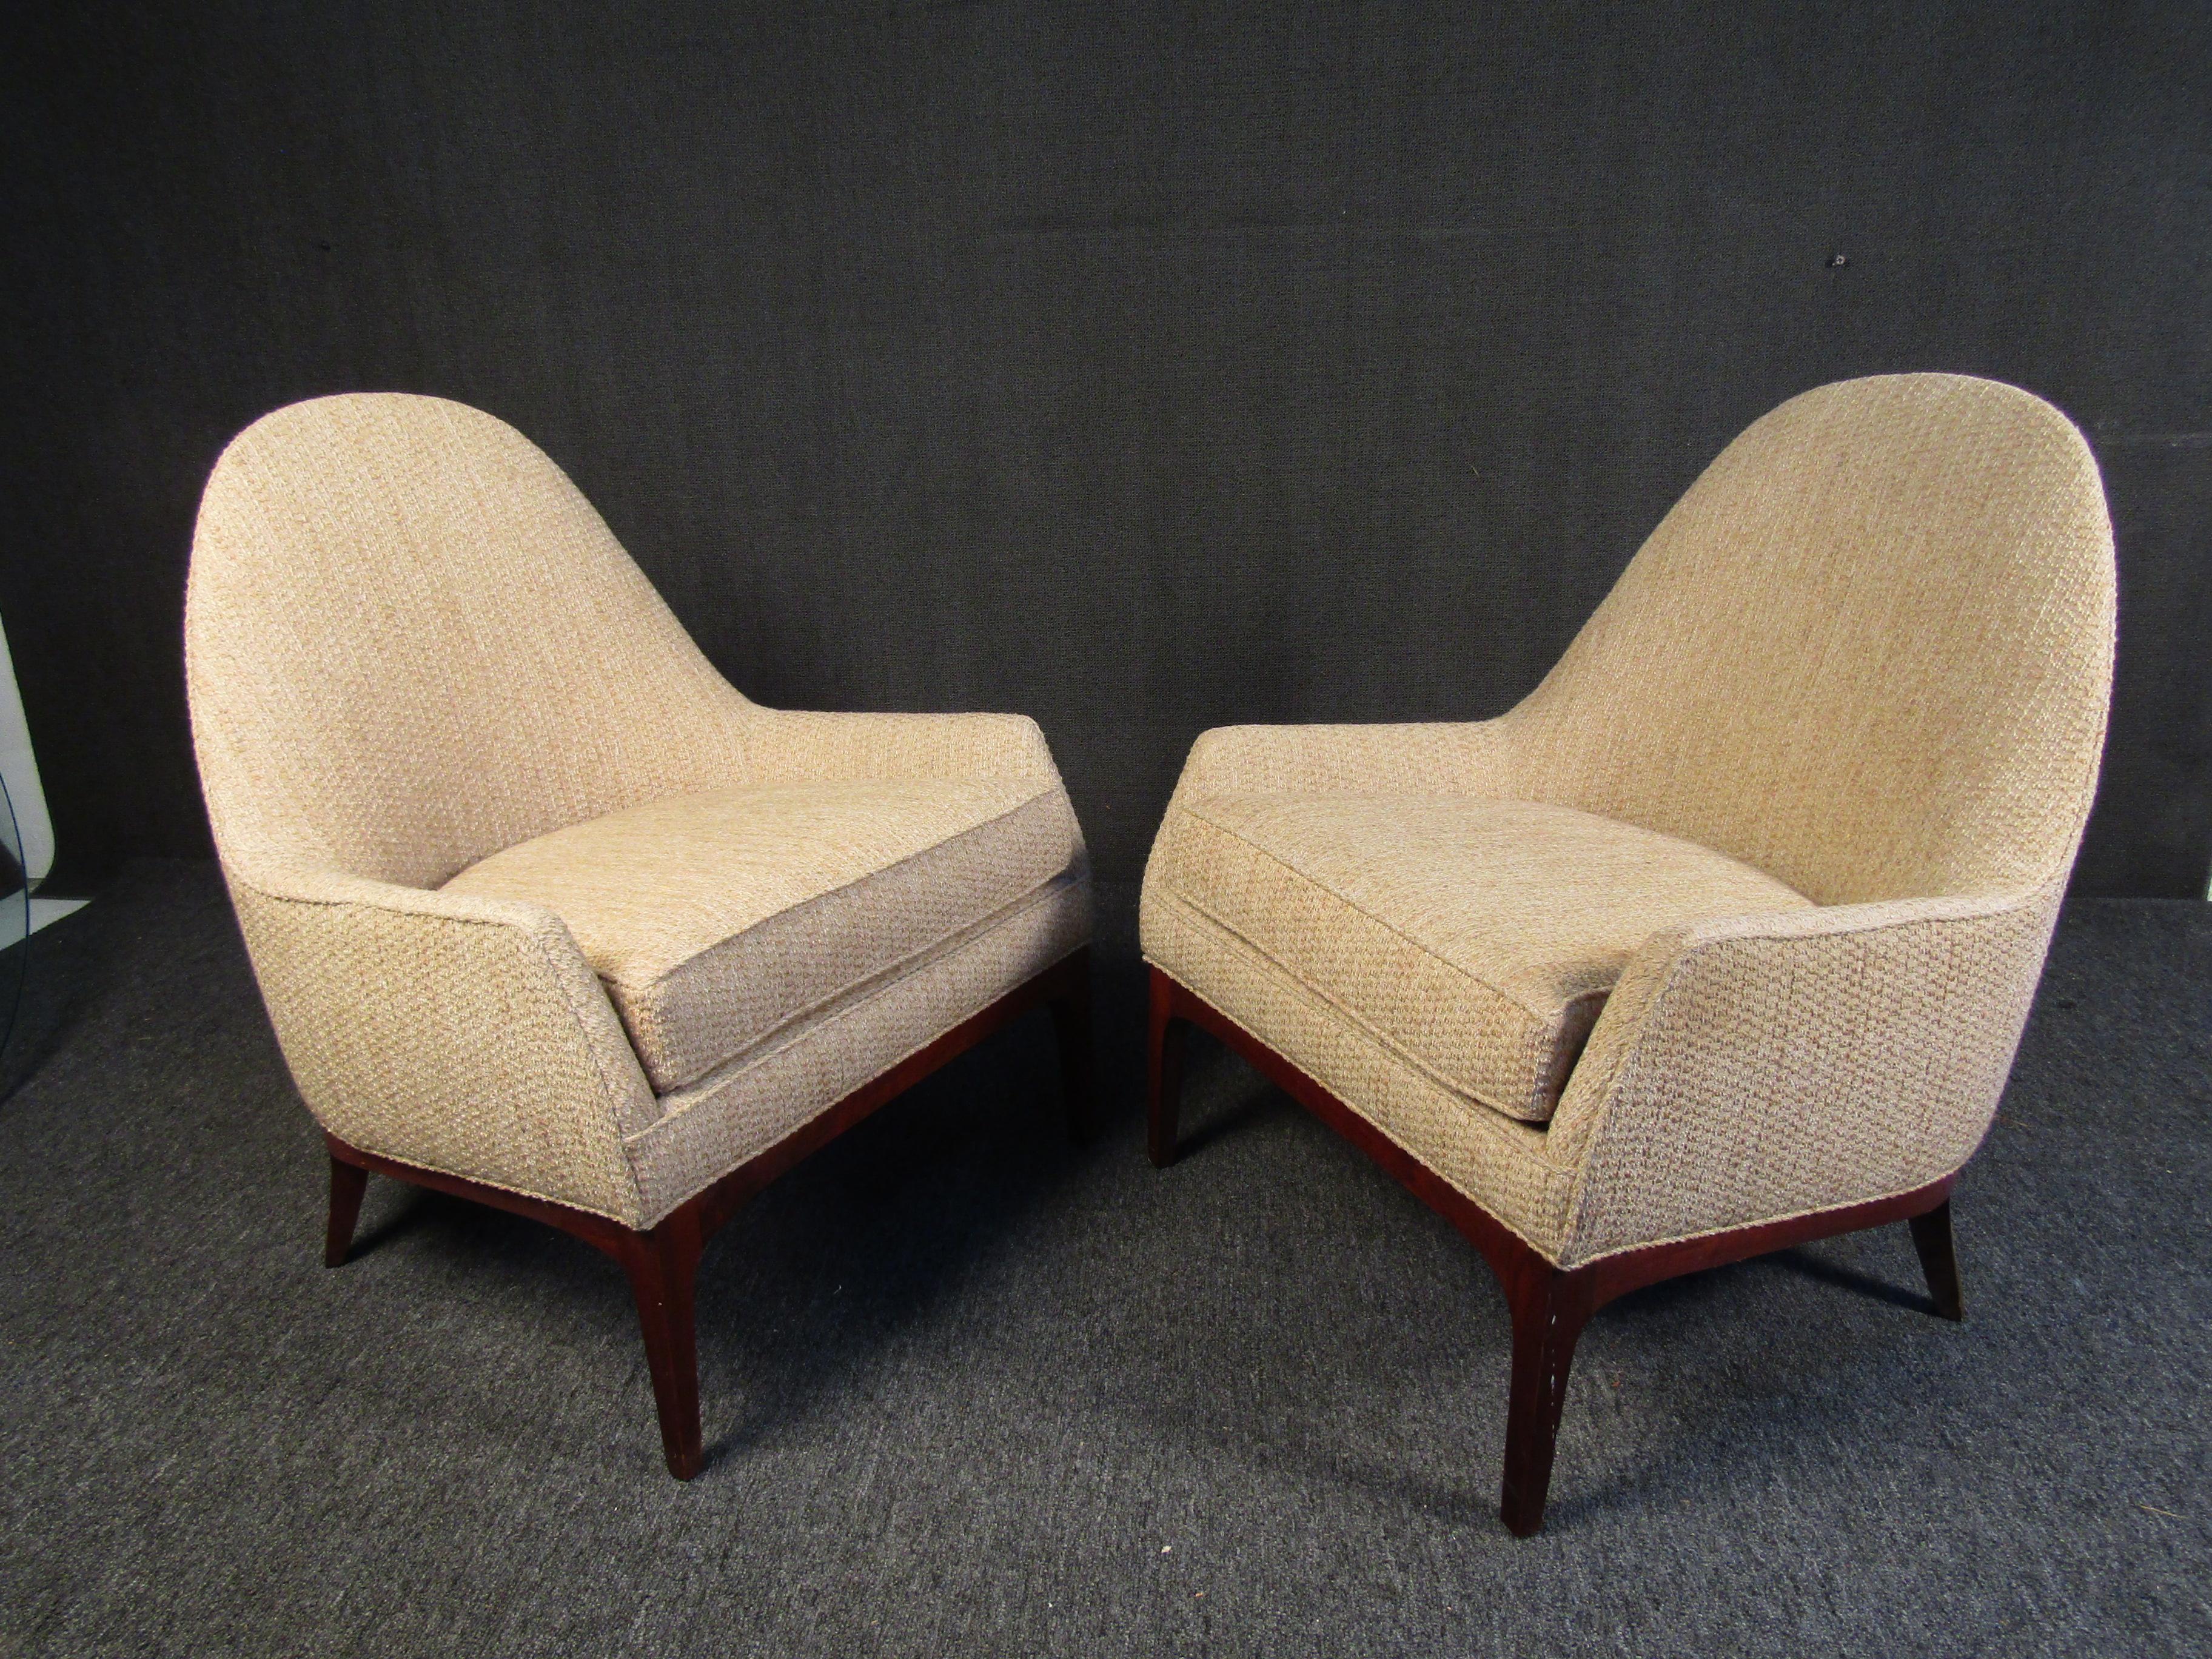 Combining a warm beige upholstery with rich walnut legs, this pair of Mid-Century Modern lounge chairs is perfect for any reading room or home library. Please confirm item location with seller (NY/NJ).